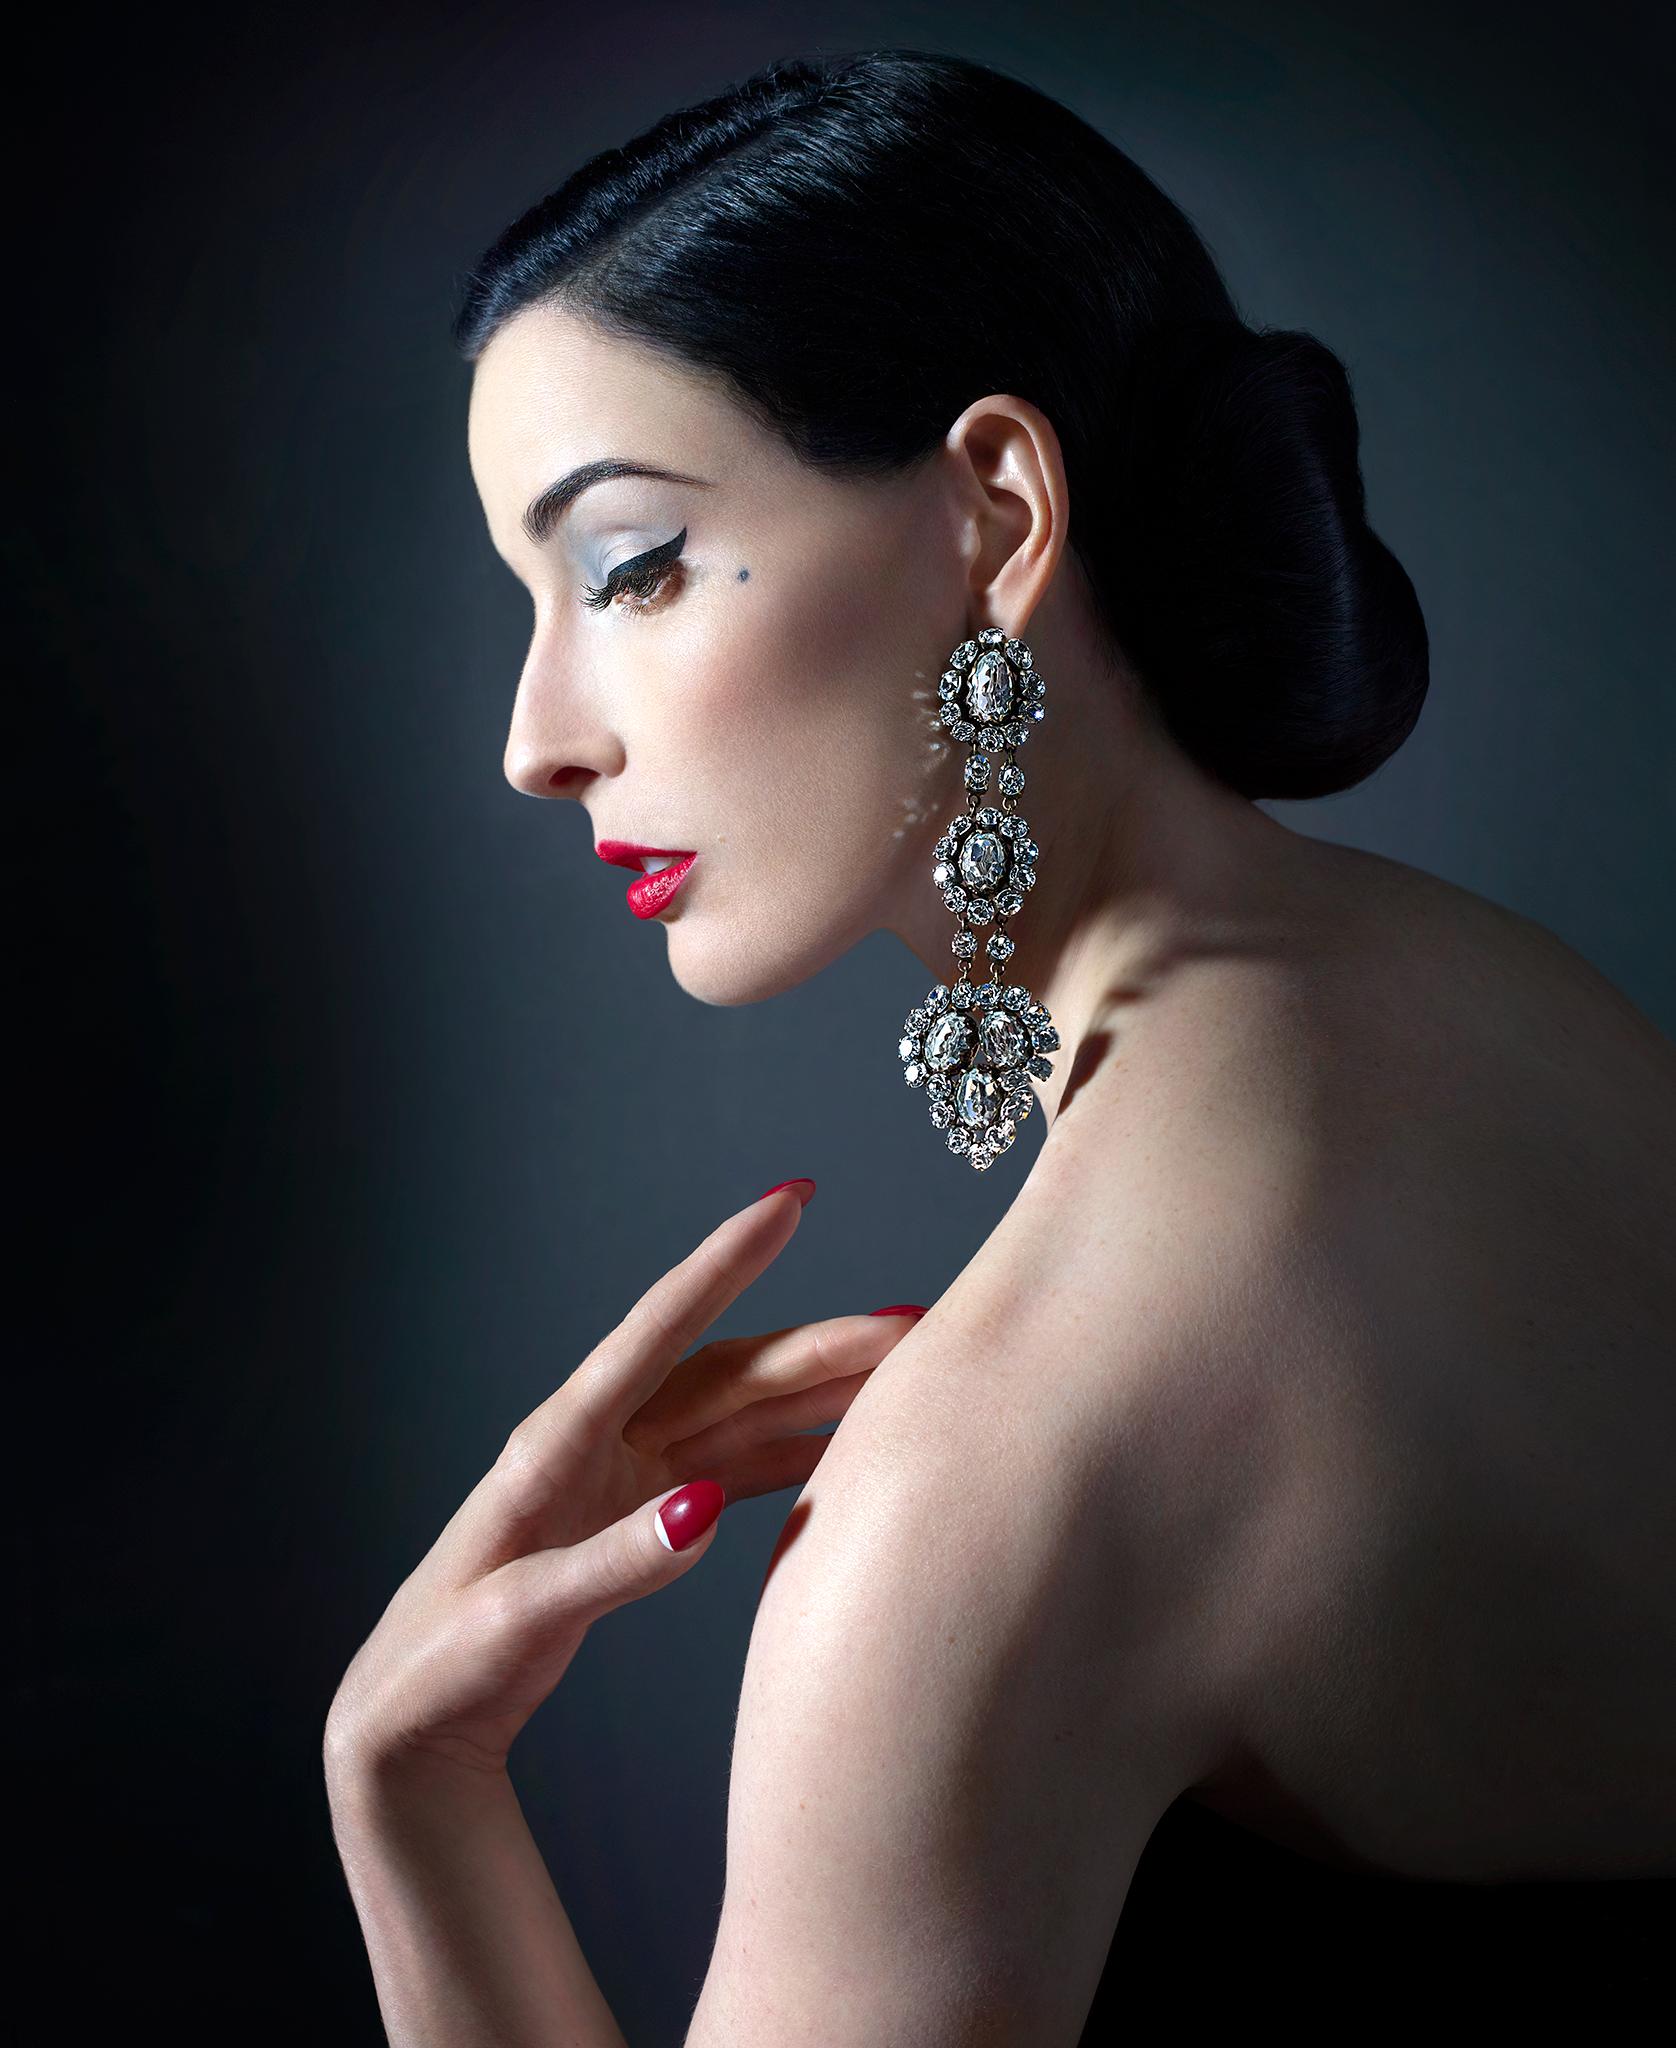 Museum quality fine art print of Dita Von Teese by photographer Markus Klinko in 2009 in Los Angeles.

This print is available in the following sizes, signed and numbered by Markus Klinko
24" high - Edition 50
40" high - Edition 25
60" high -